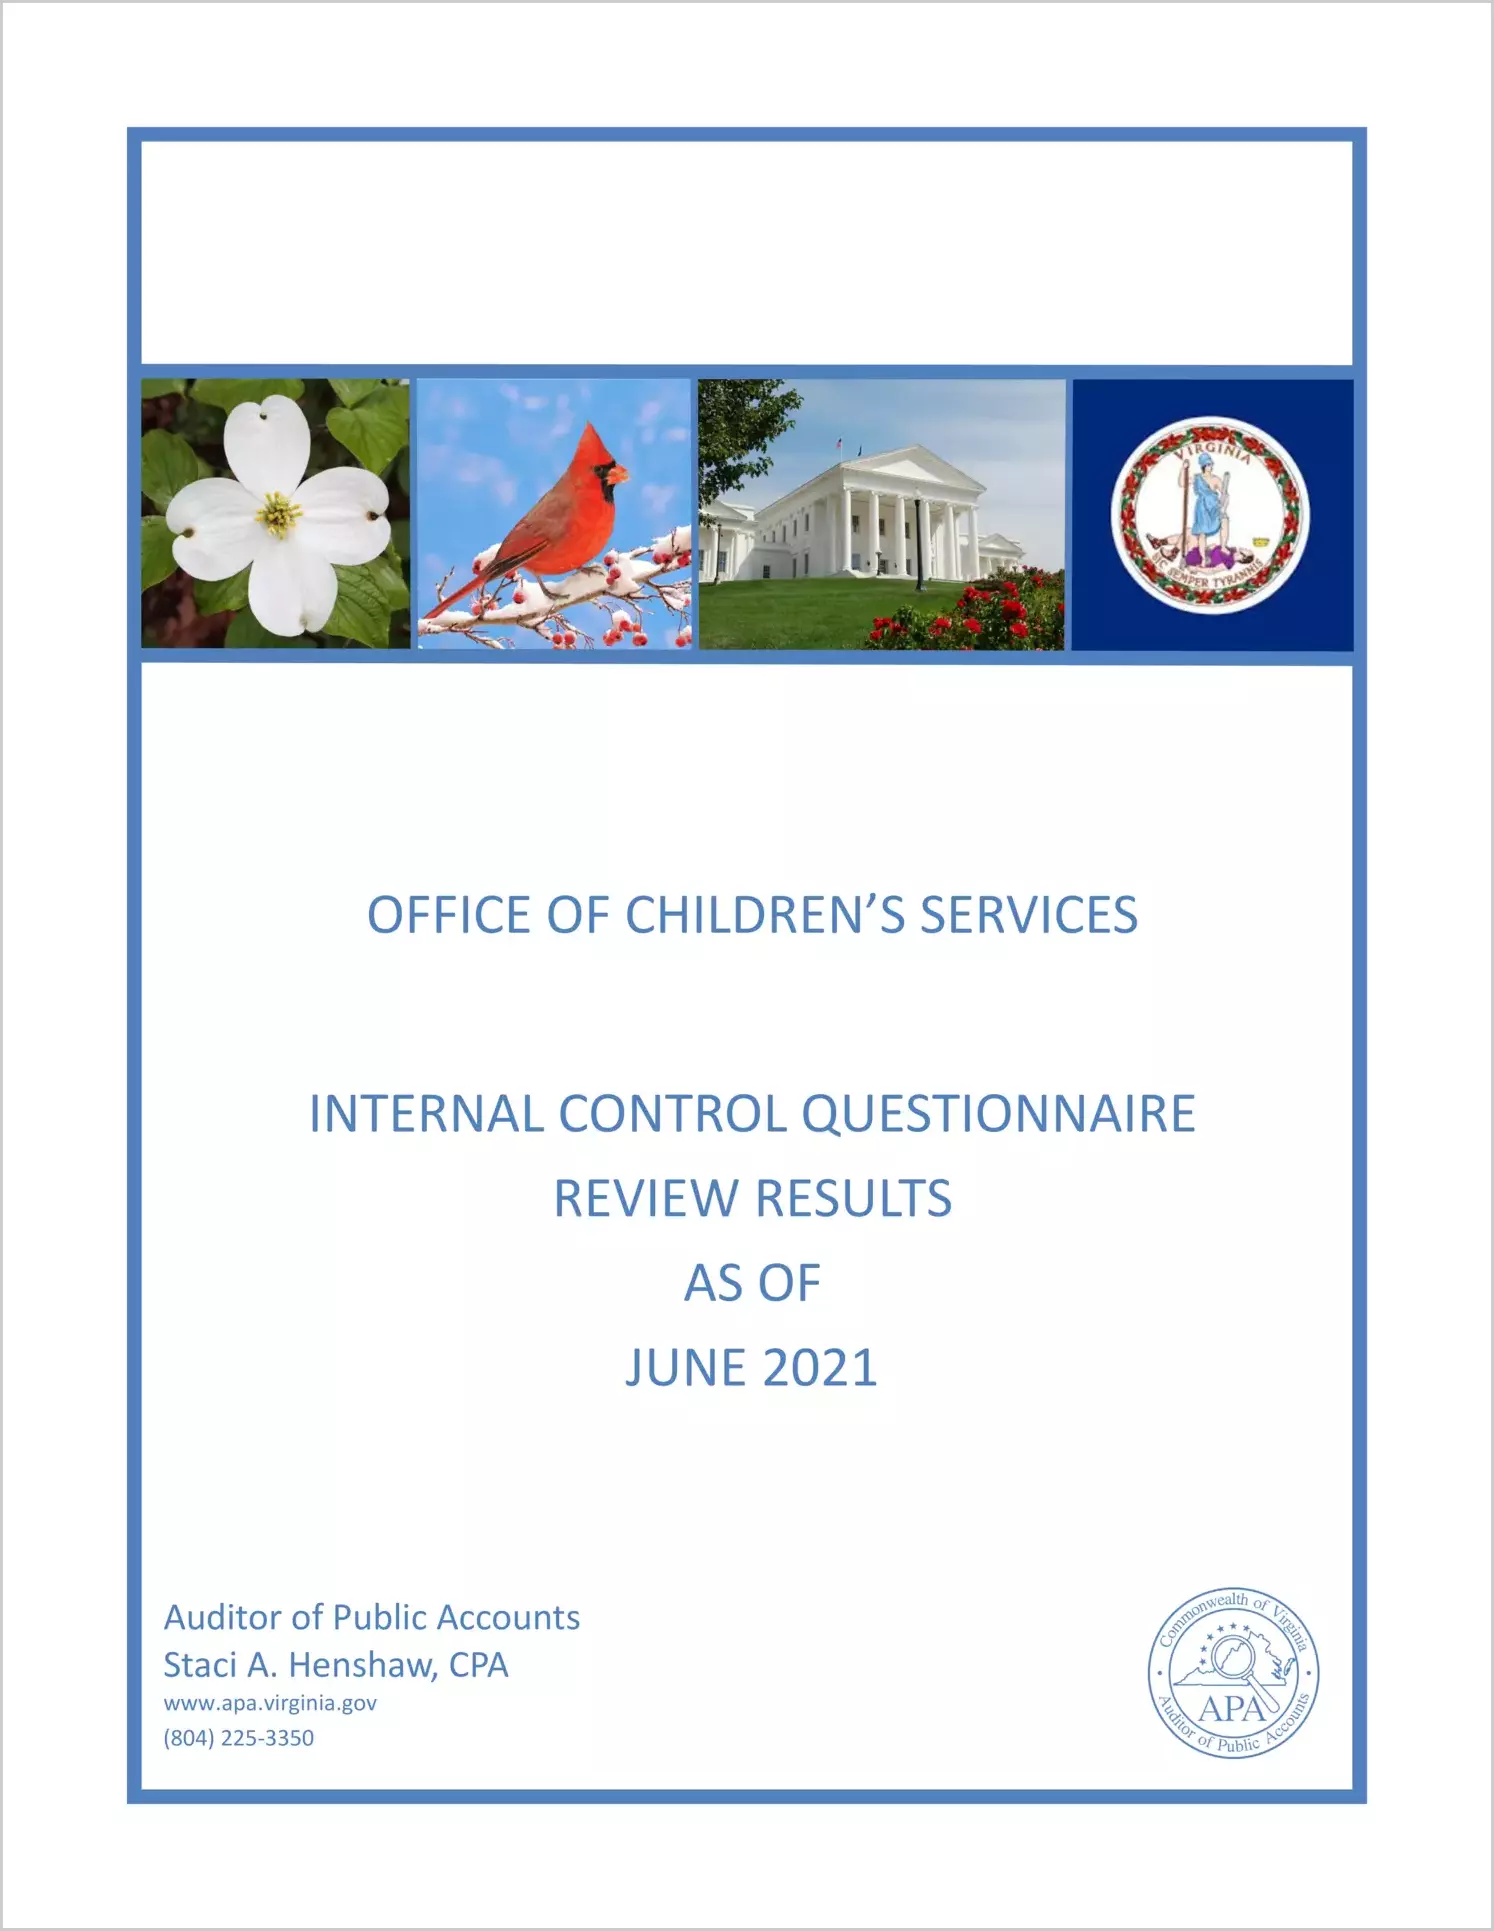 Office of Children's Services Internal Control Questionnaire Review Results as of June 2021